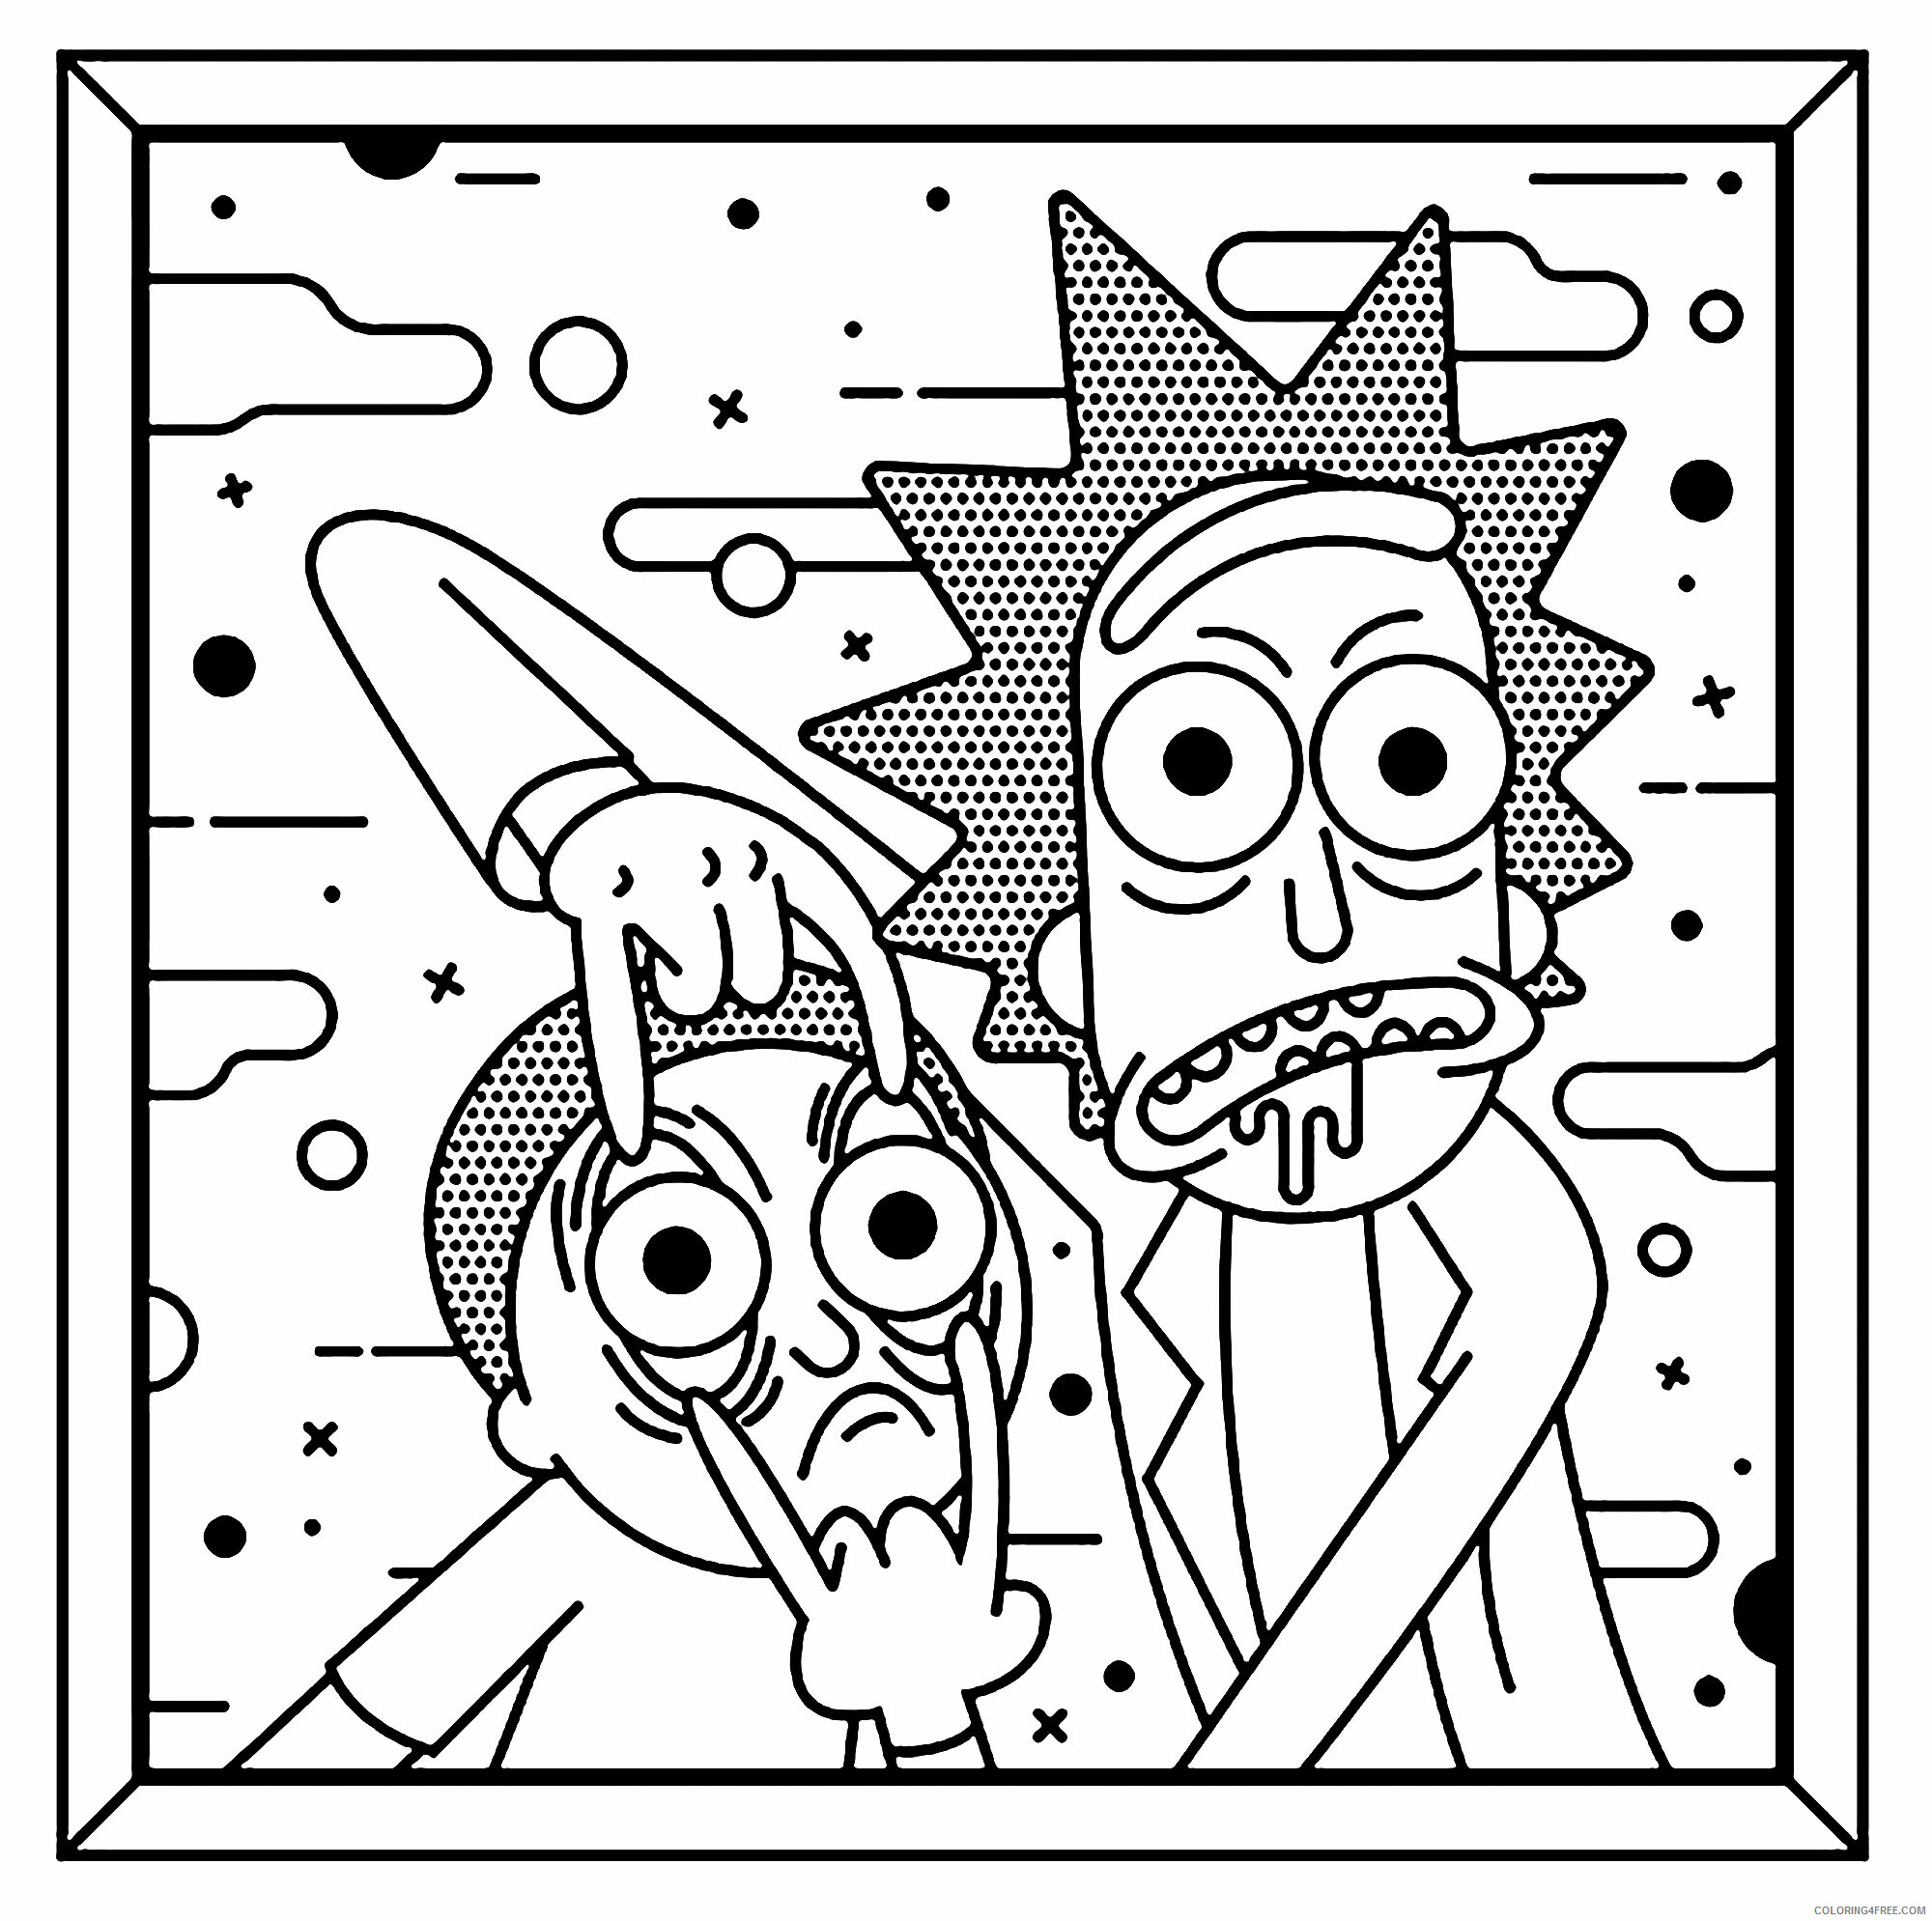 Rick and Morty Coloring Pages TV Film Rick and Morty Printable 2020 07109 Coloring4free